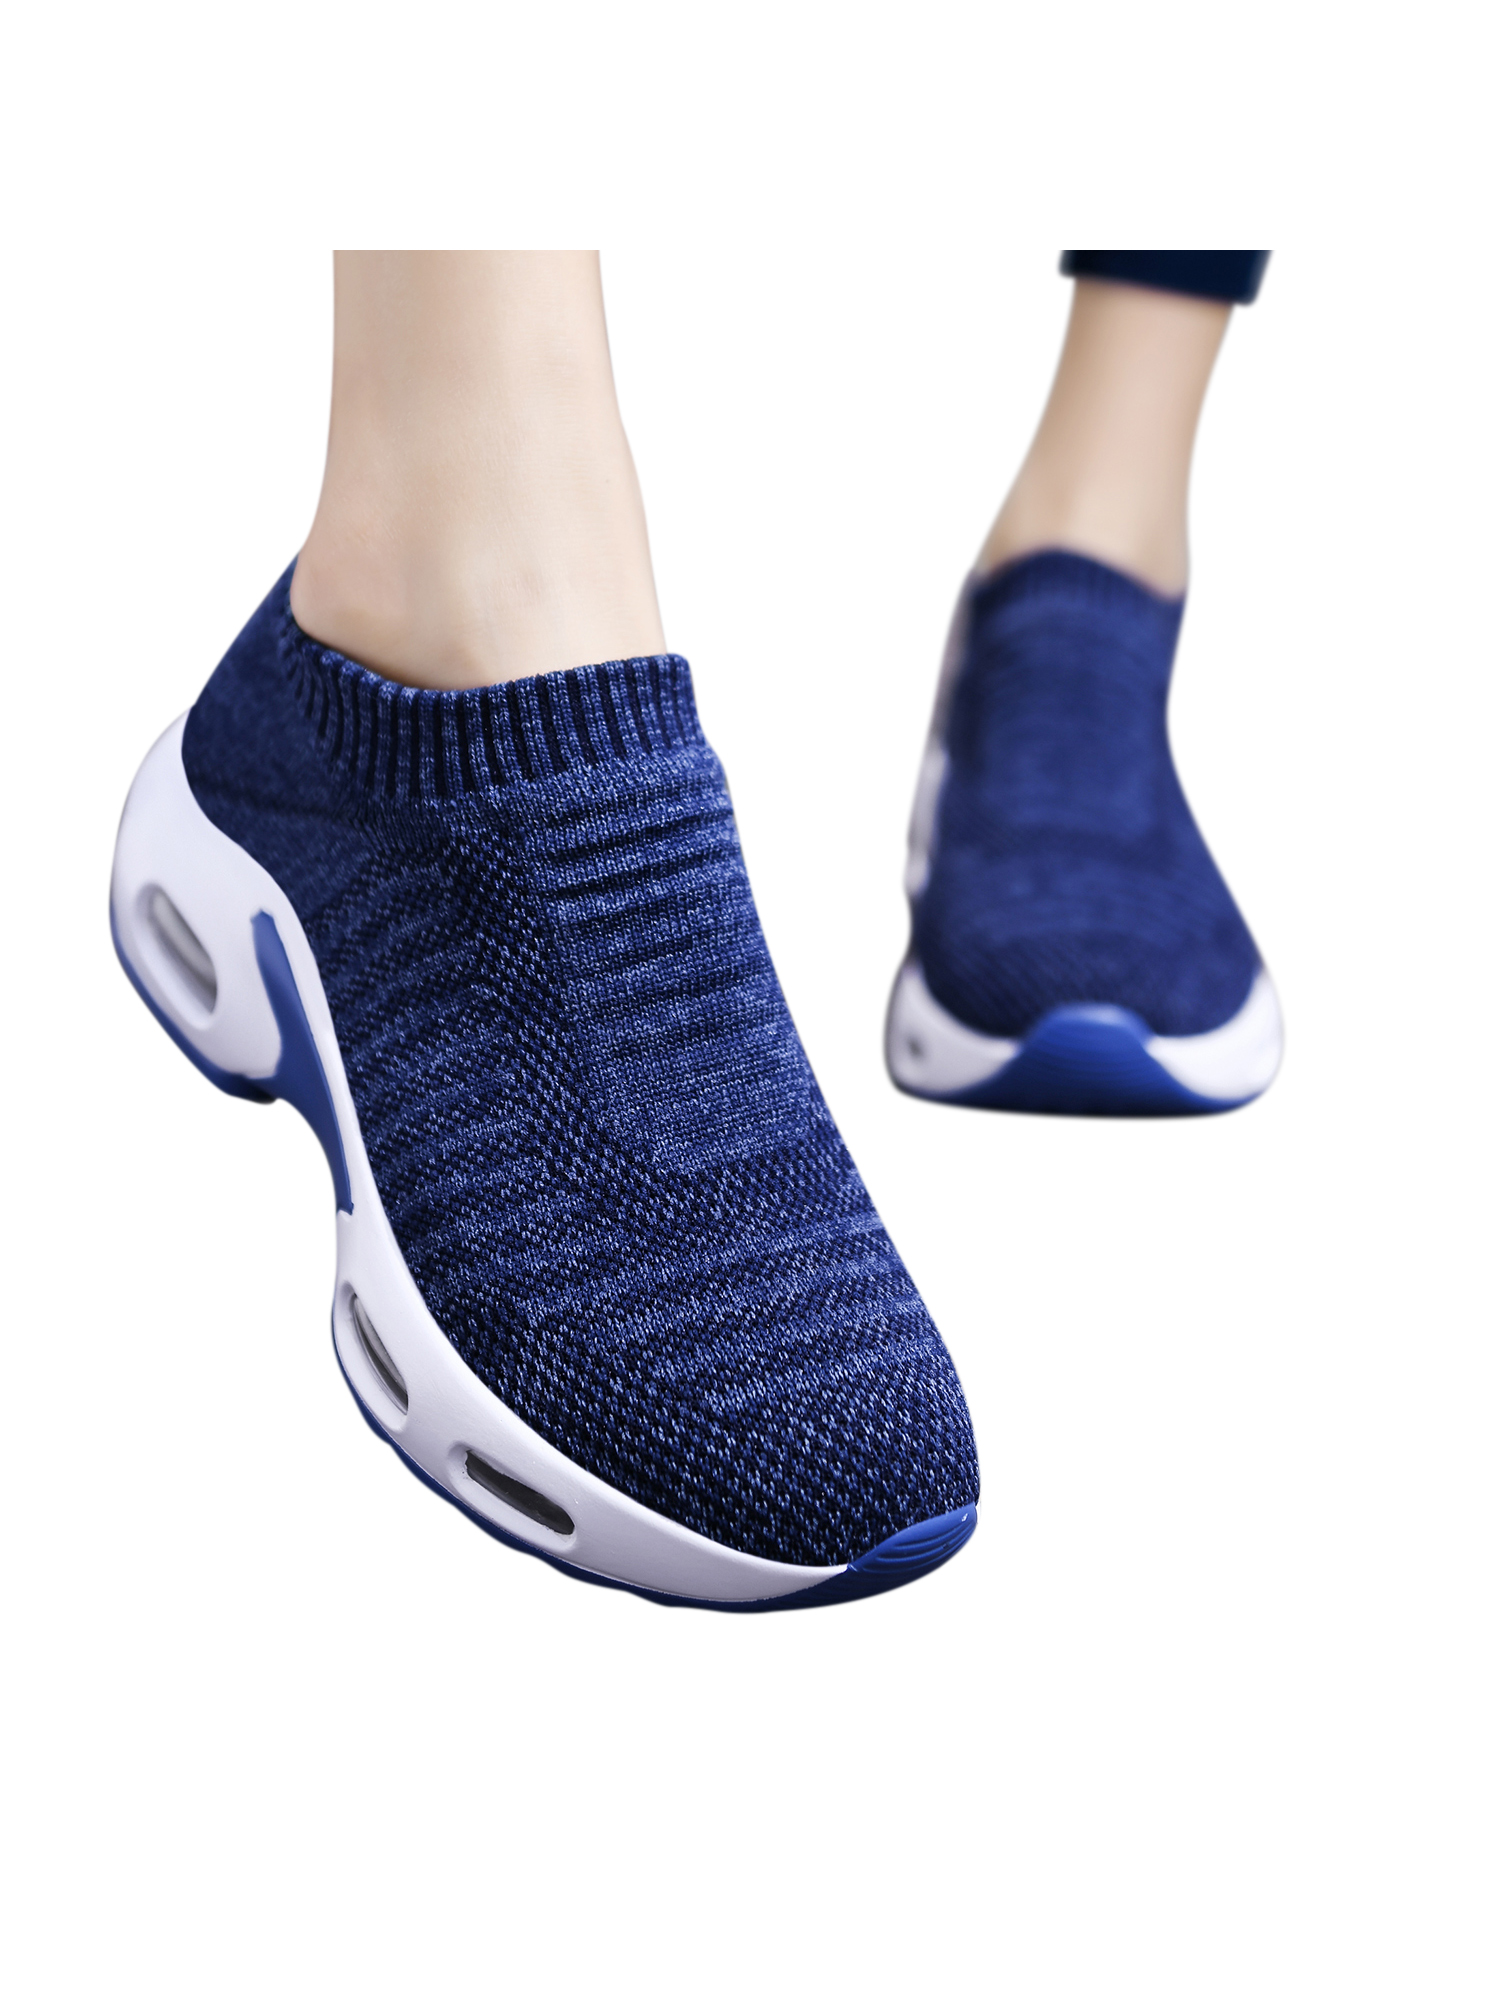 Details about  / AIR cushioned Women/'s High Platform Sneakers NEW ARRIVAL Summer 2021